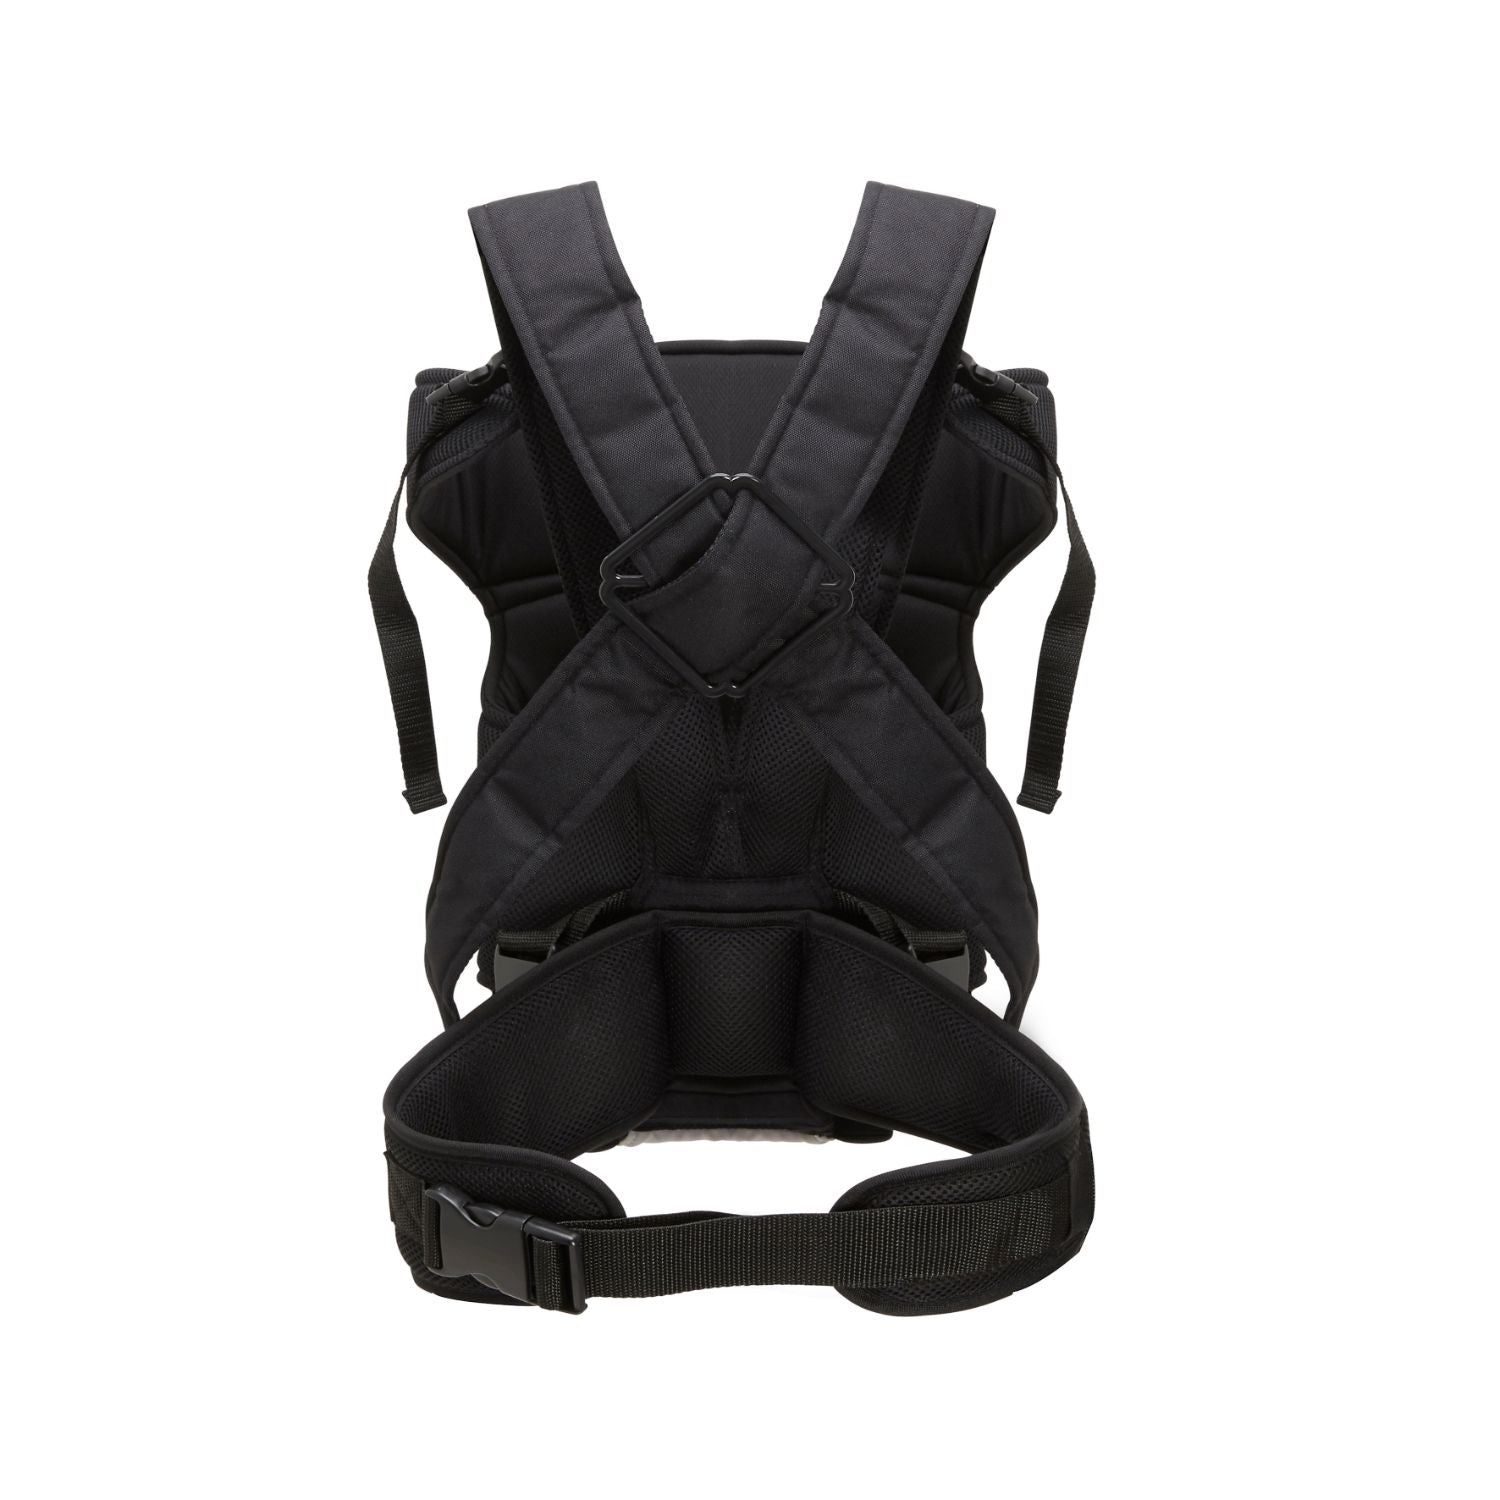 Mothercare 2 Position Baby Carrier